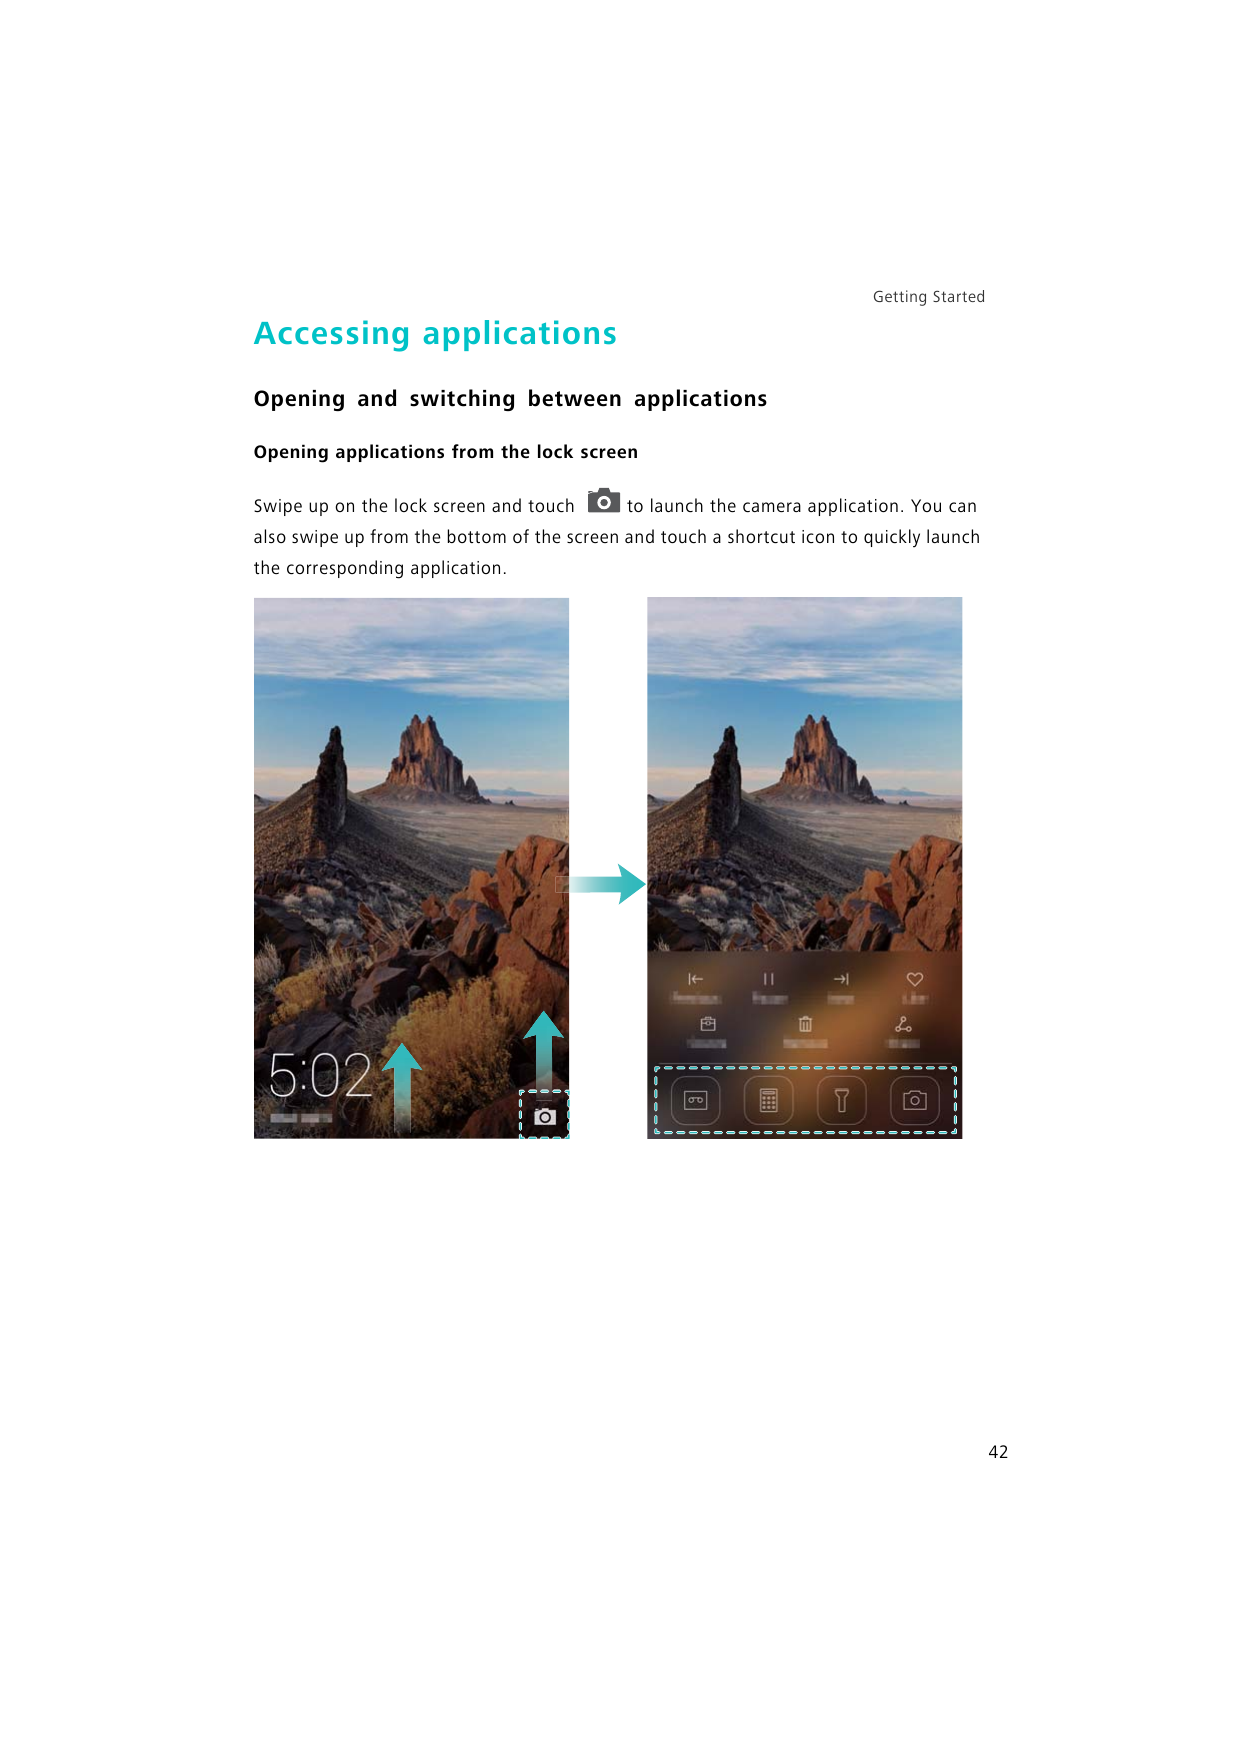 Getting StartedAccessing applicationsOpening and switching between applicationsOpening applications from the lock screenSwipe up